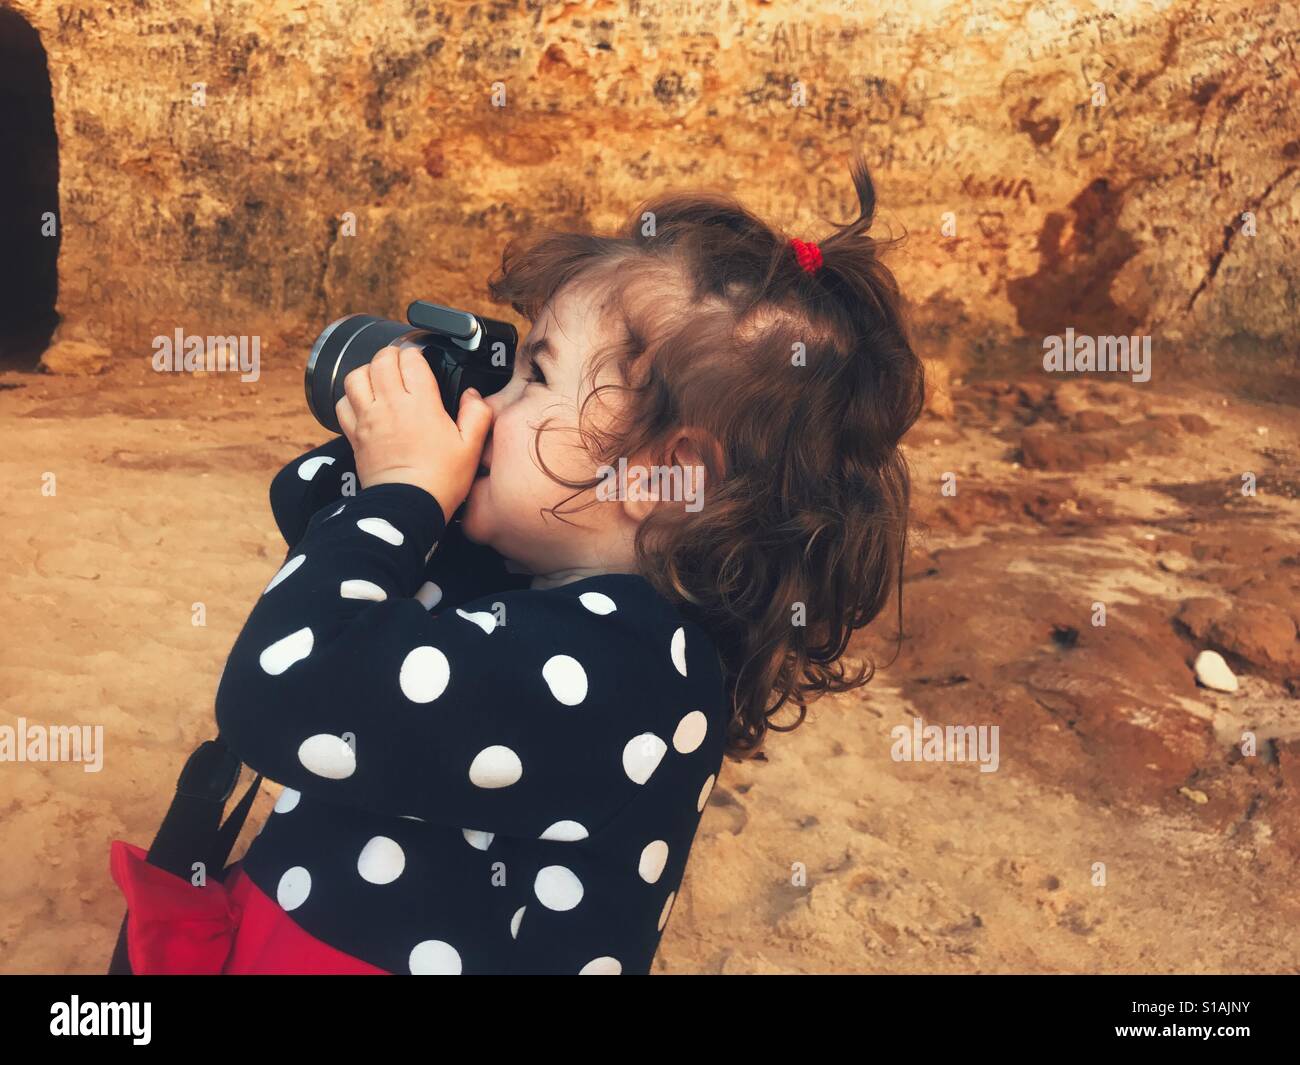 Little girl holding a camera Stock Photo